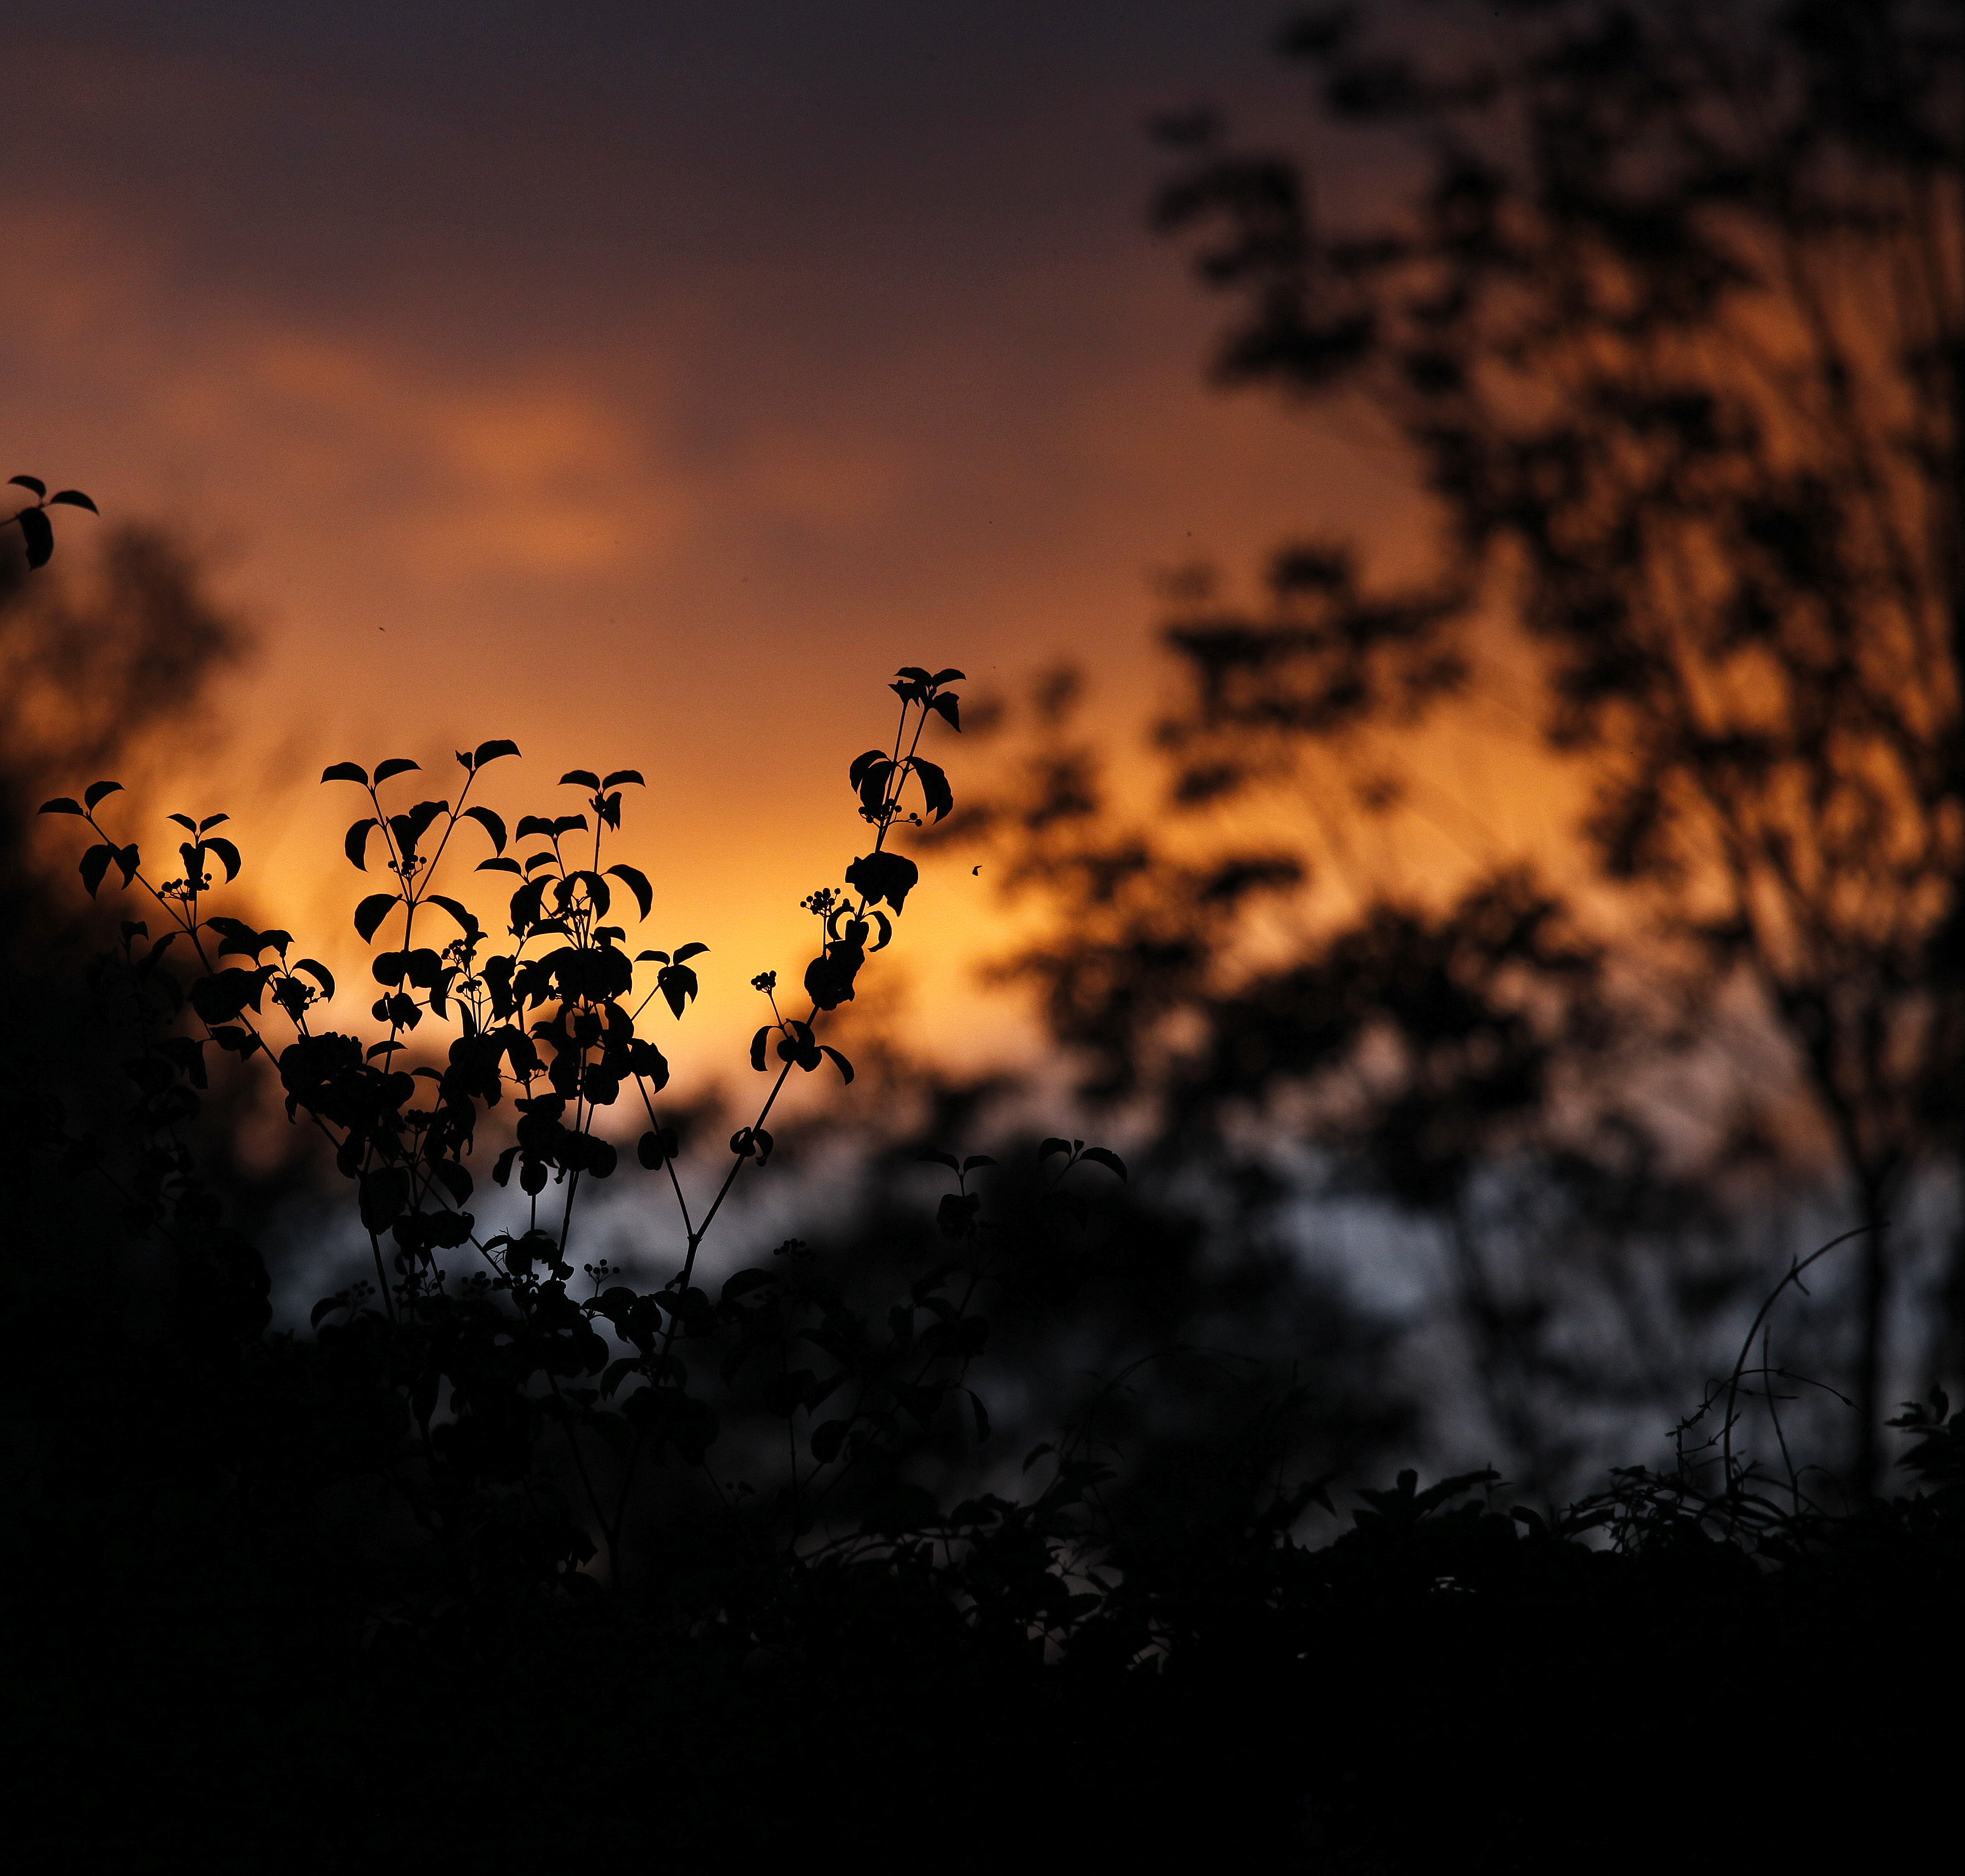 dark, sunset, silhouettes, leaves, outlines, plants phone background